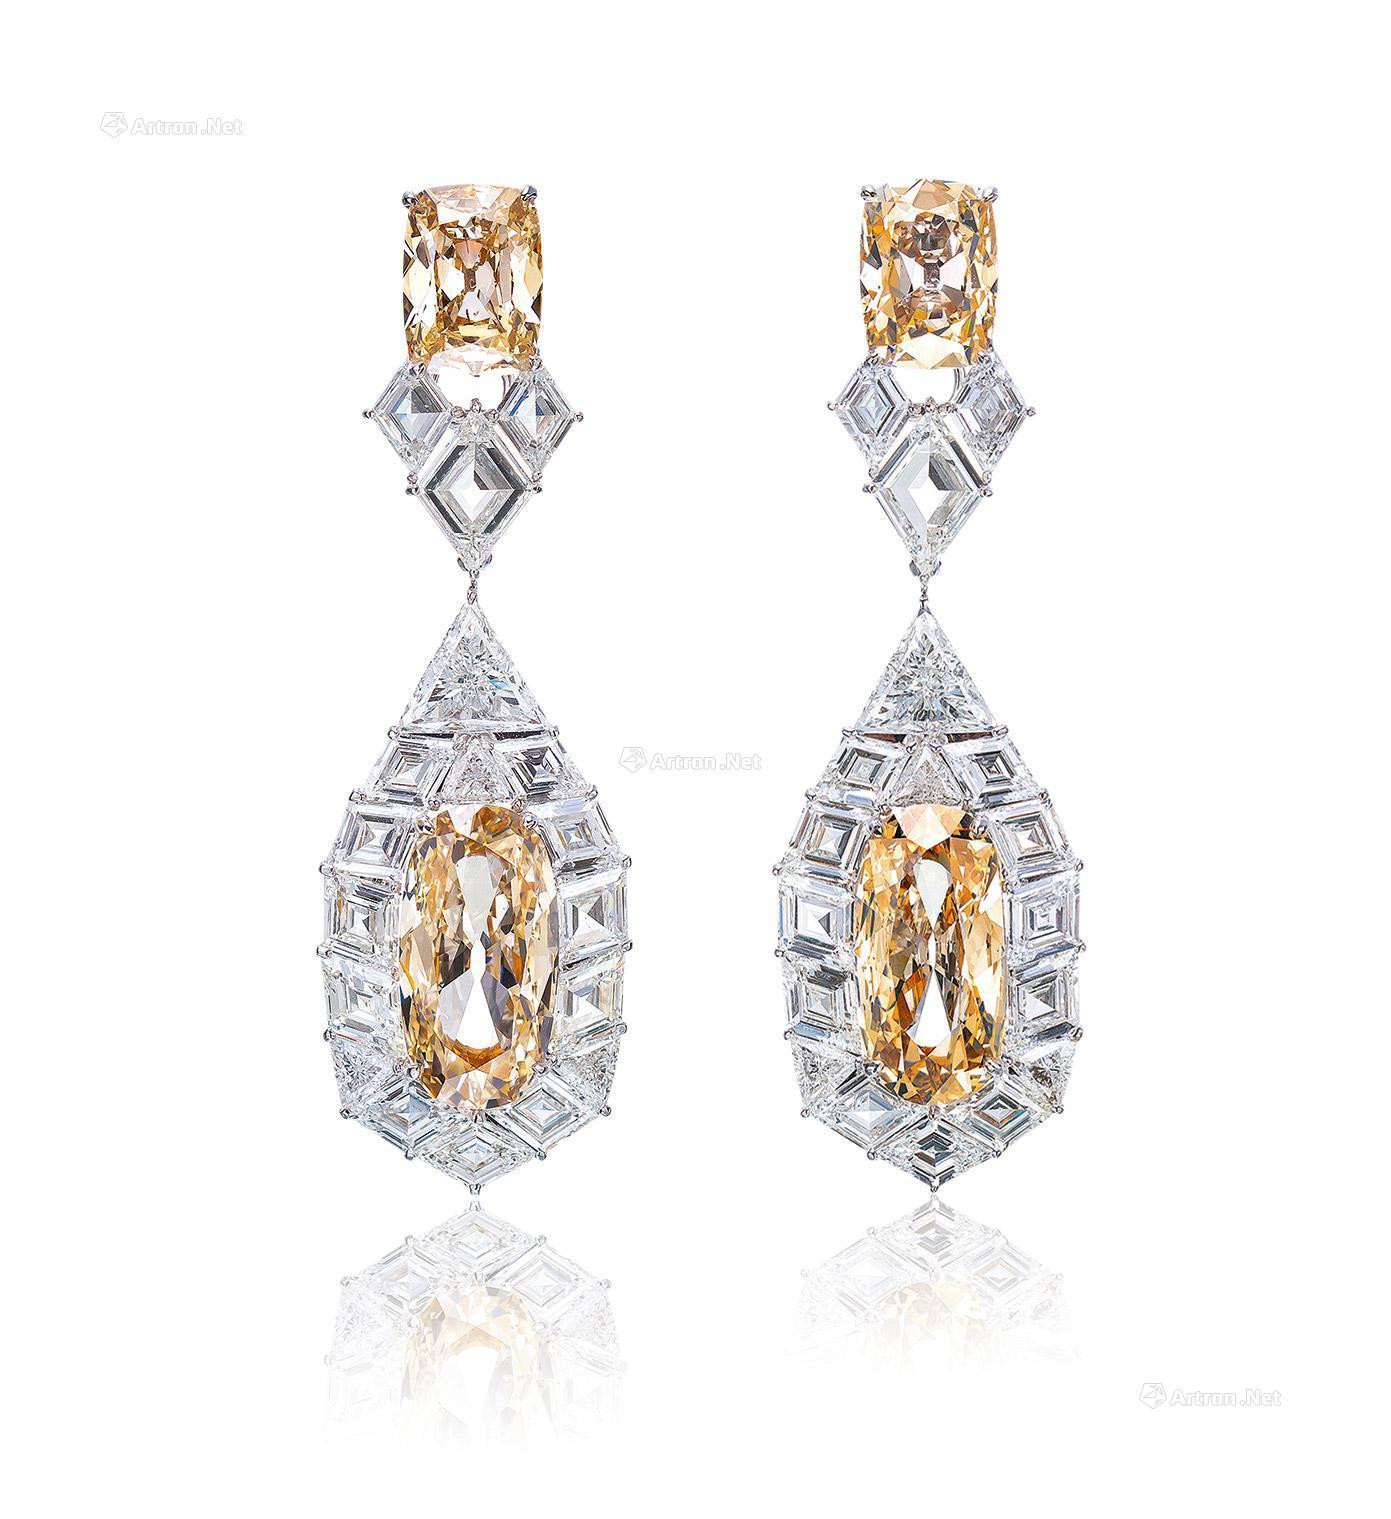 A PAIR OF 7.02 AND 6.11 CARAT LIGHT BROWN DIAMOND AND DIAMOND EARRINGS